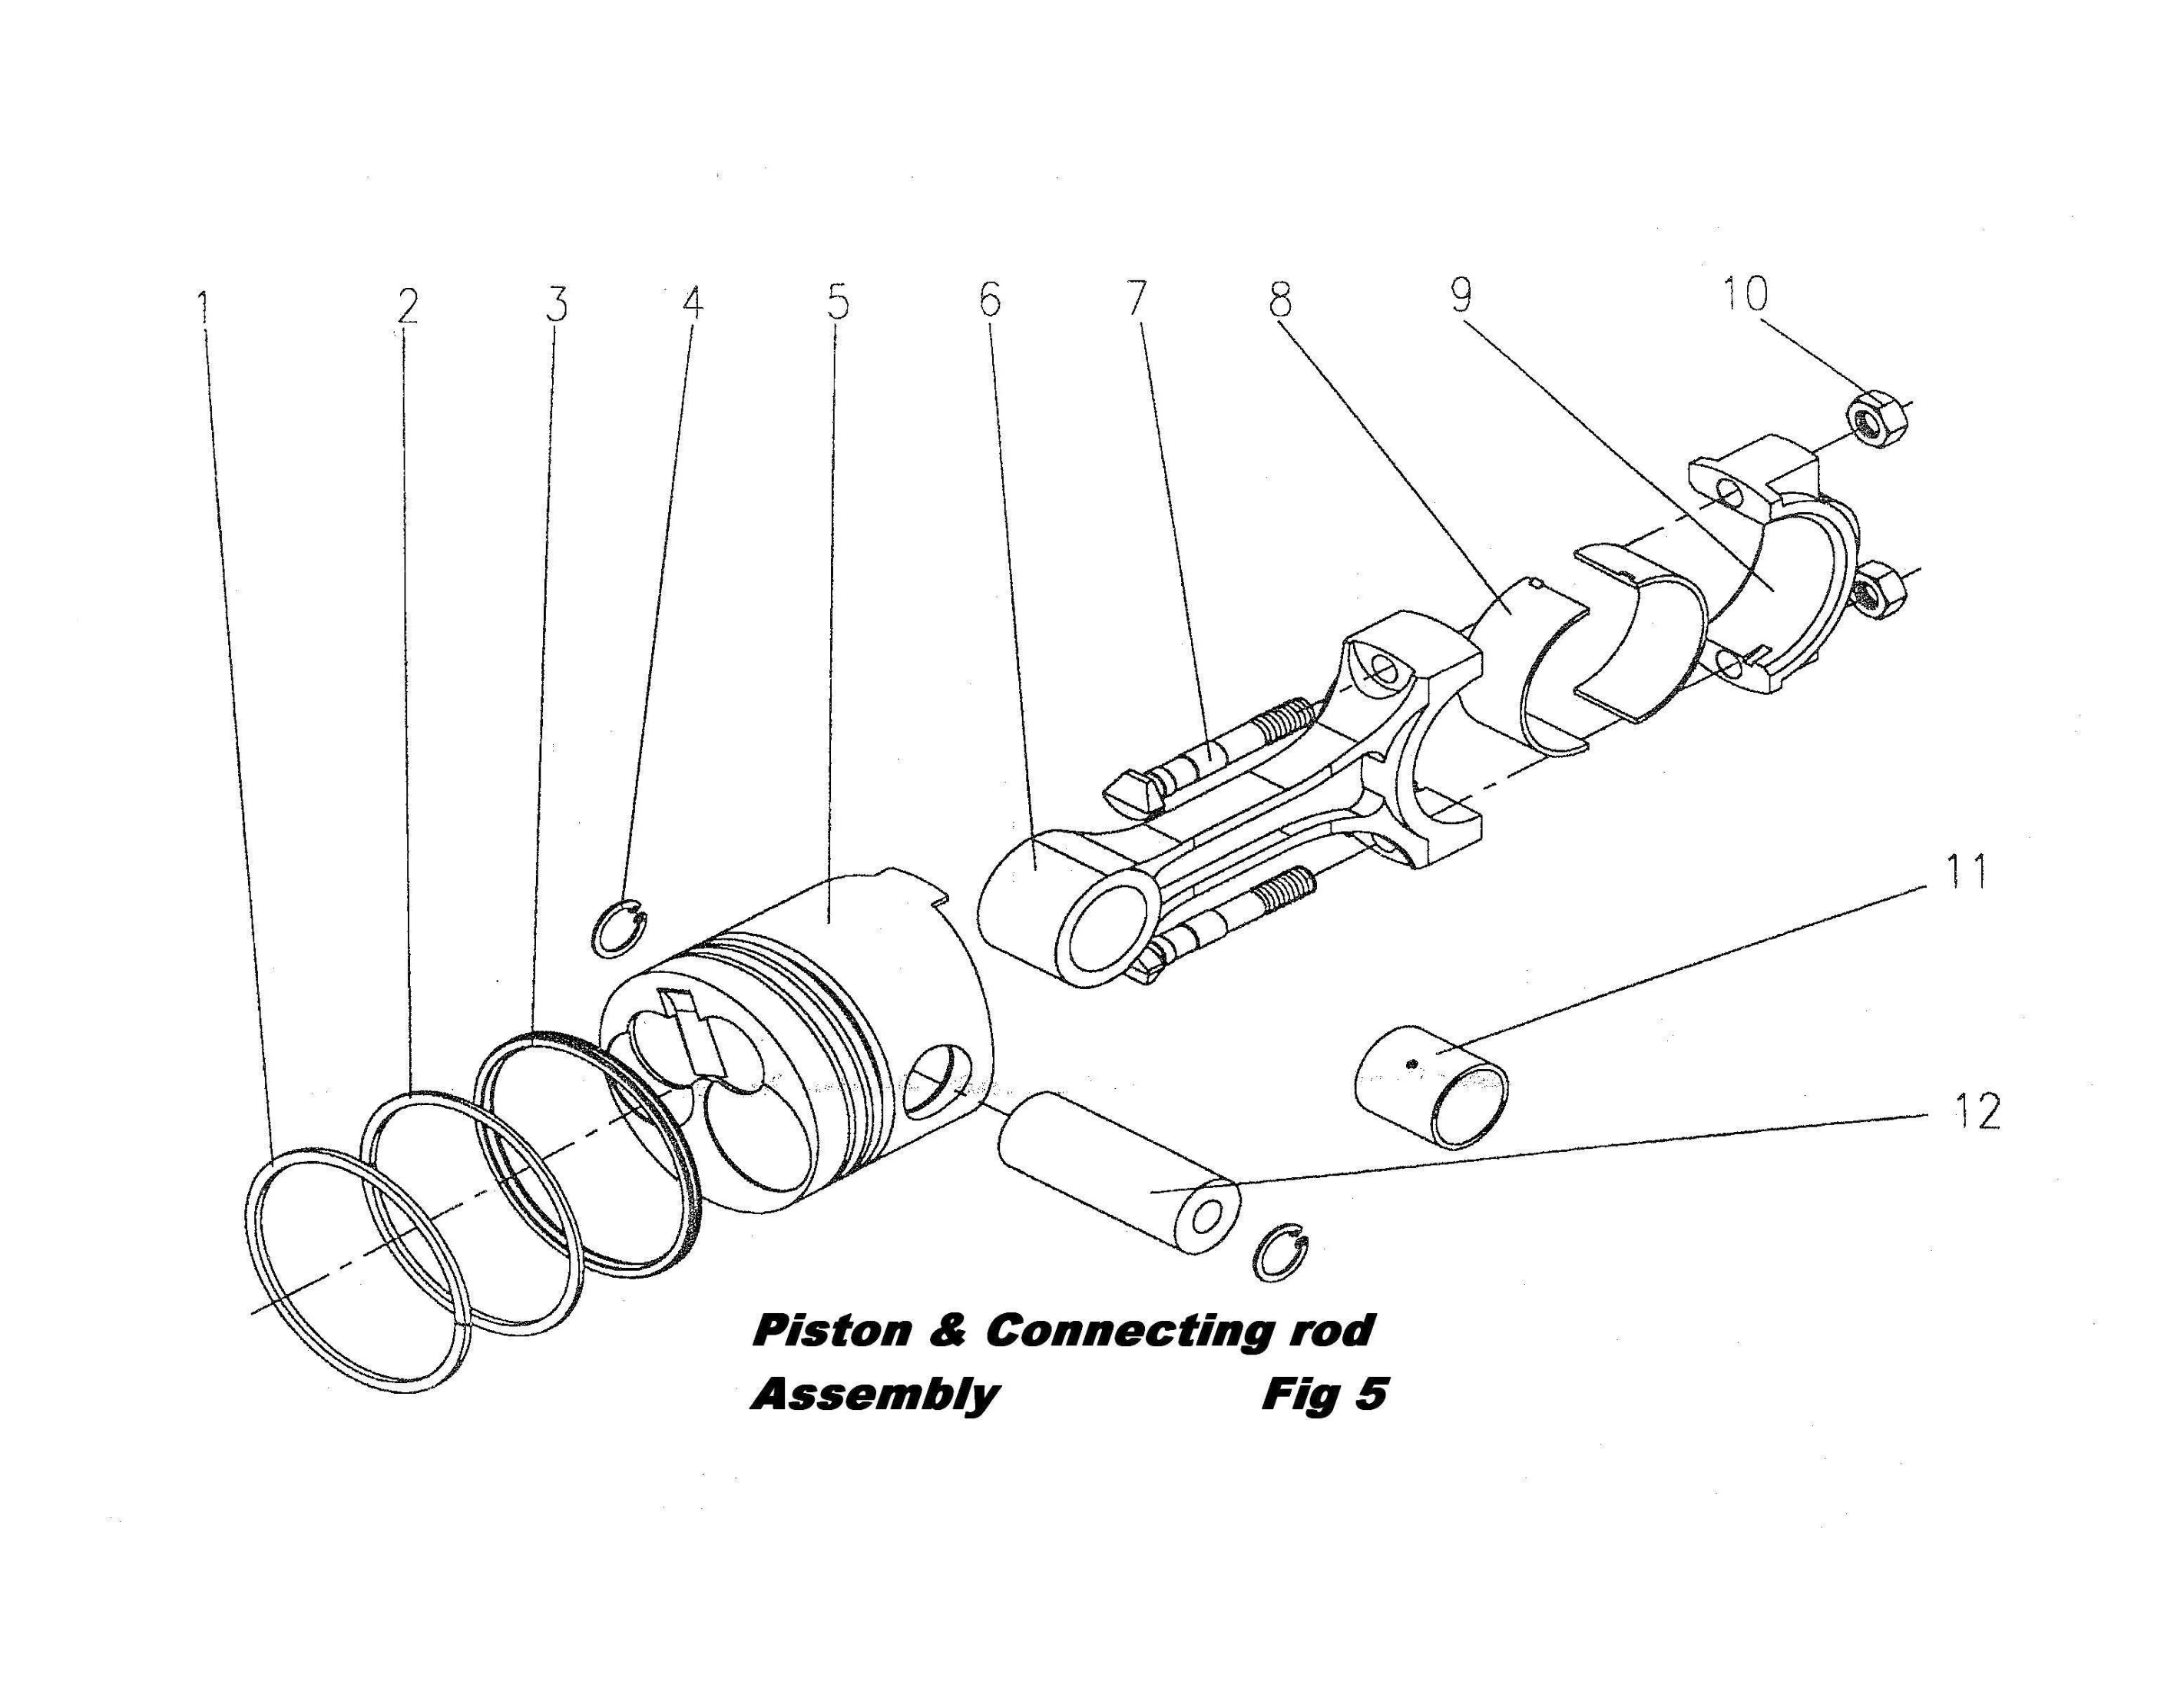 Piston & Connecting rod Assembly